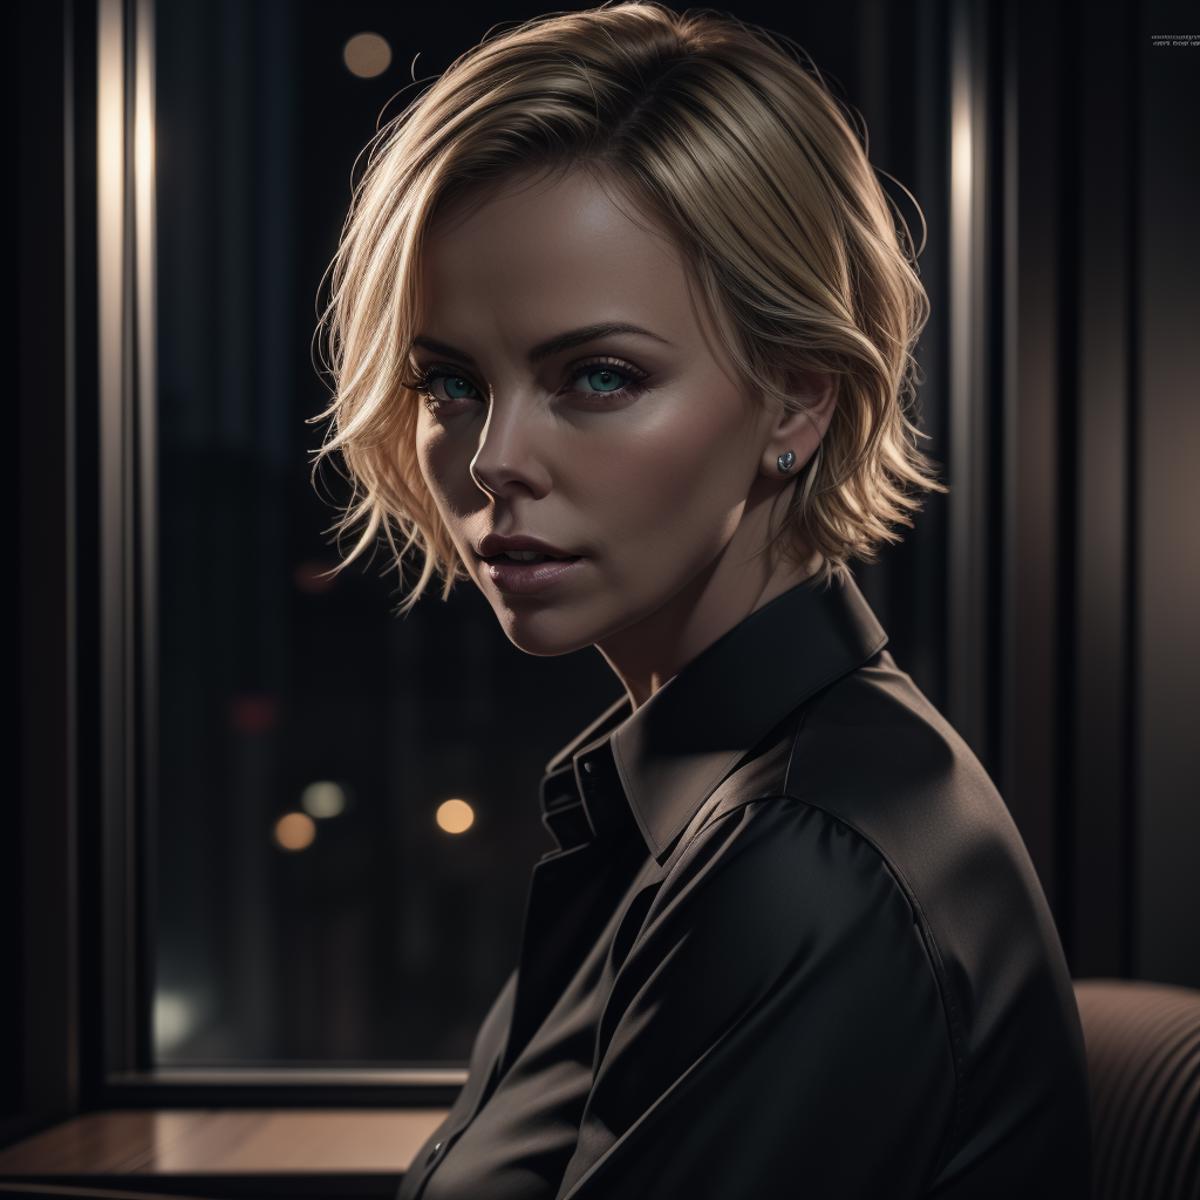 Charlize Theron image by infamous__fish